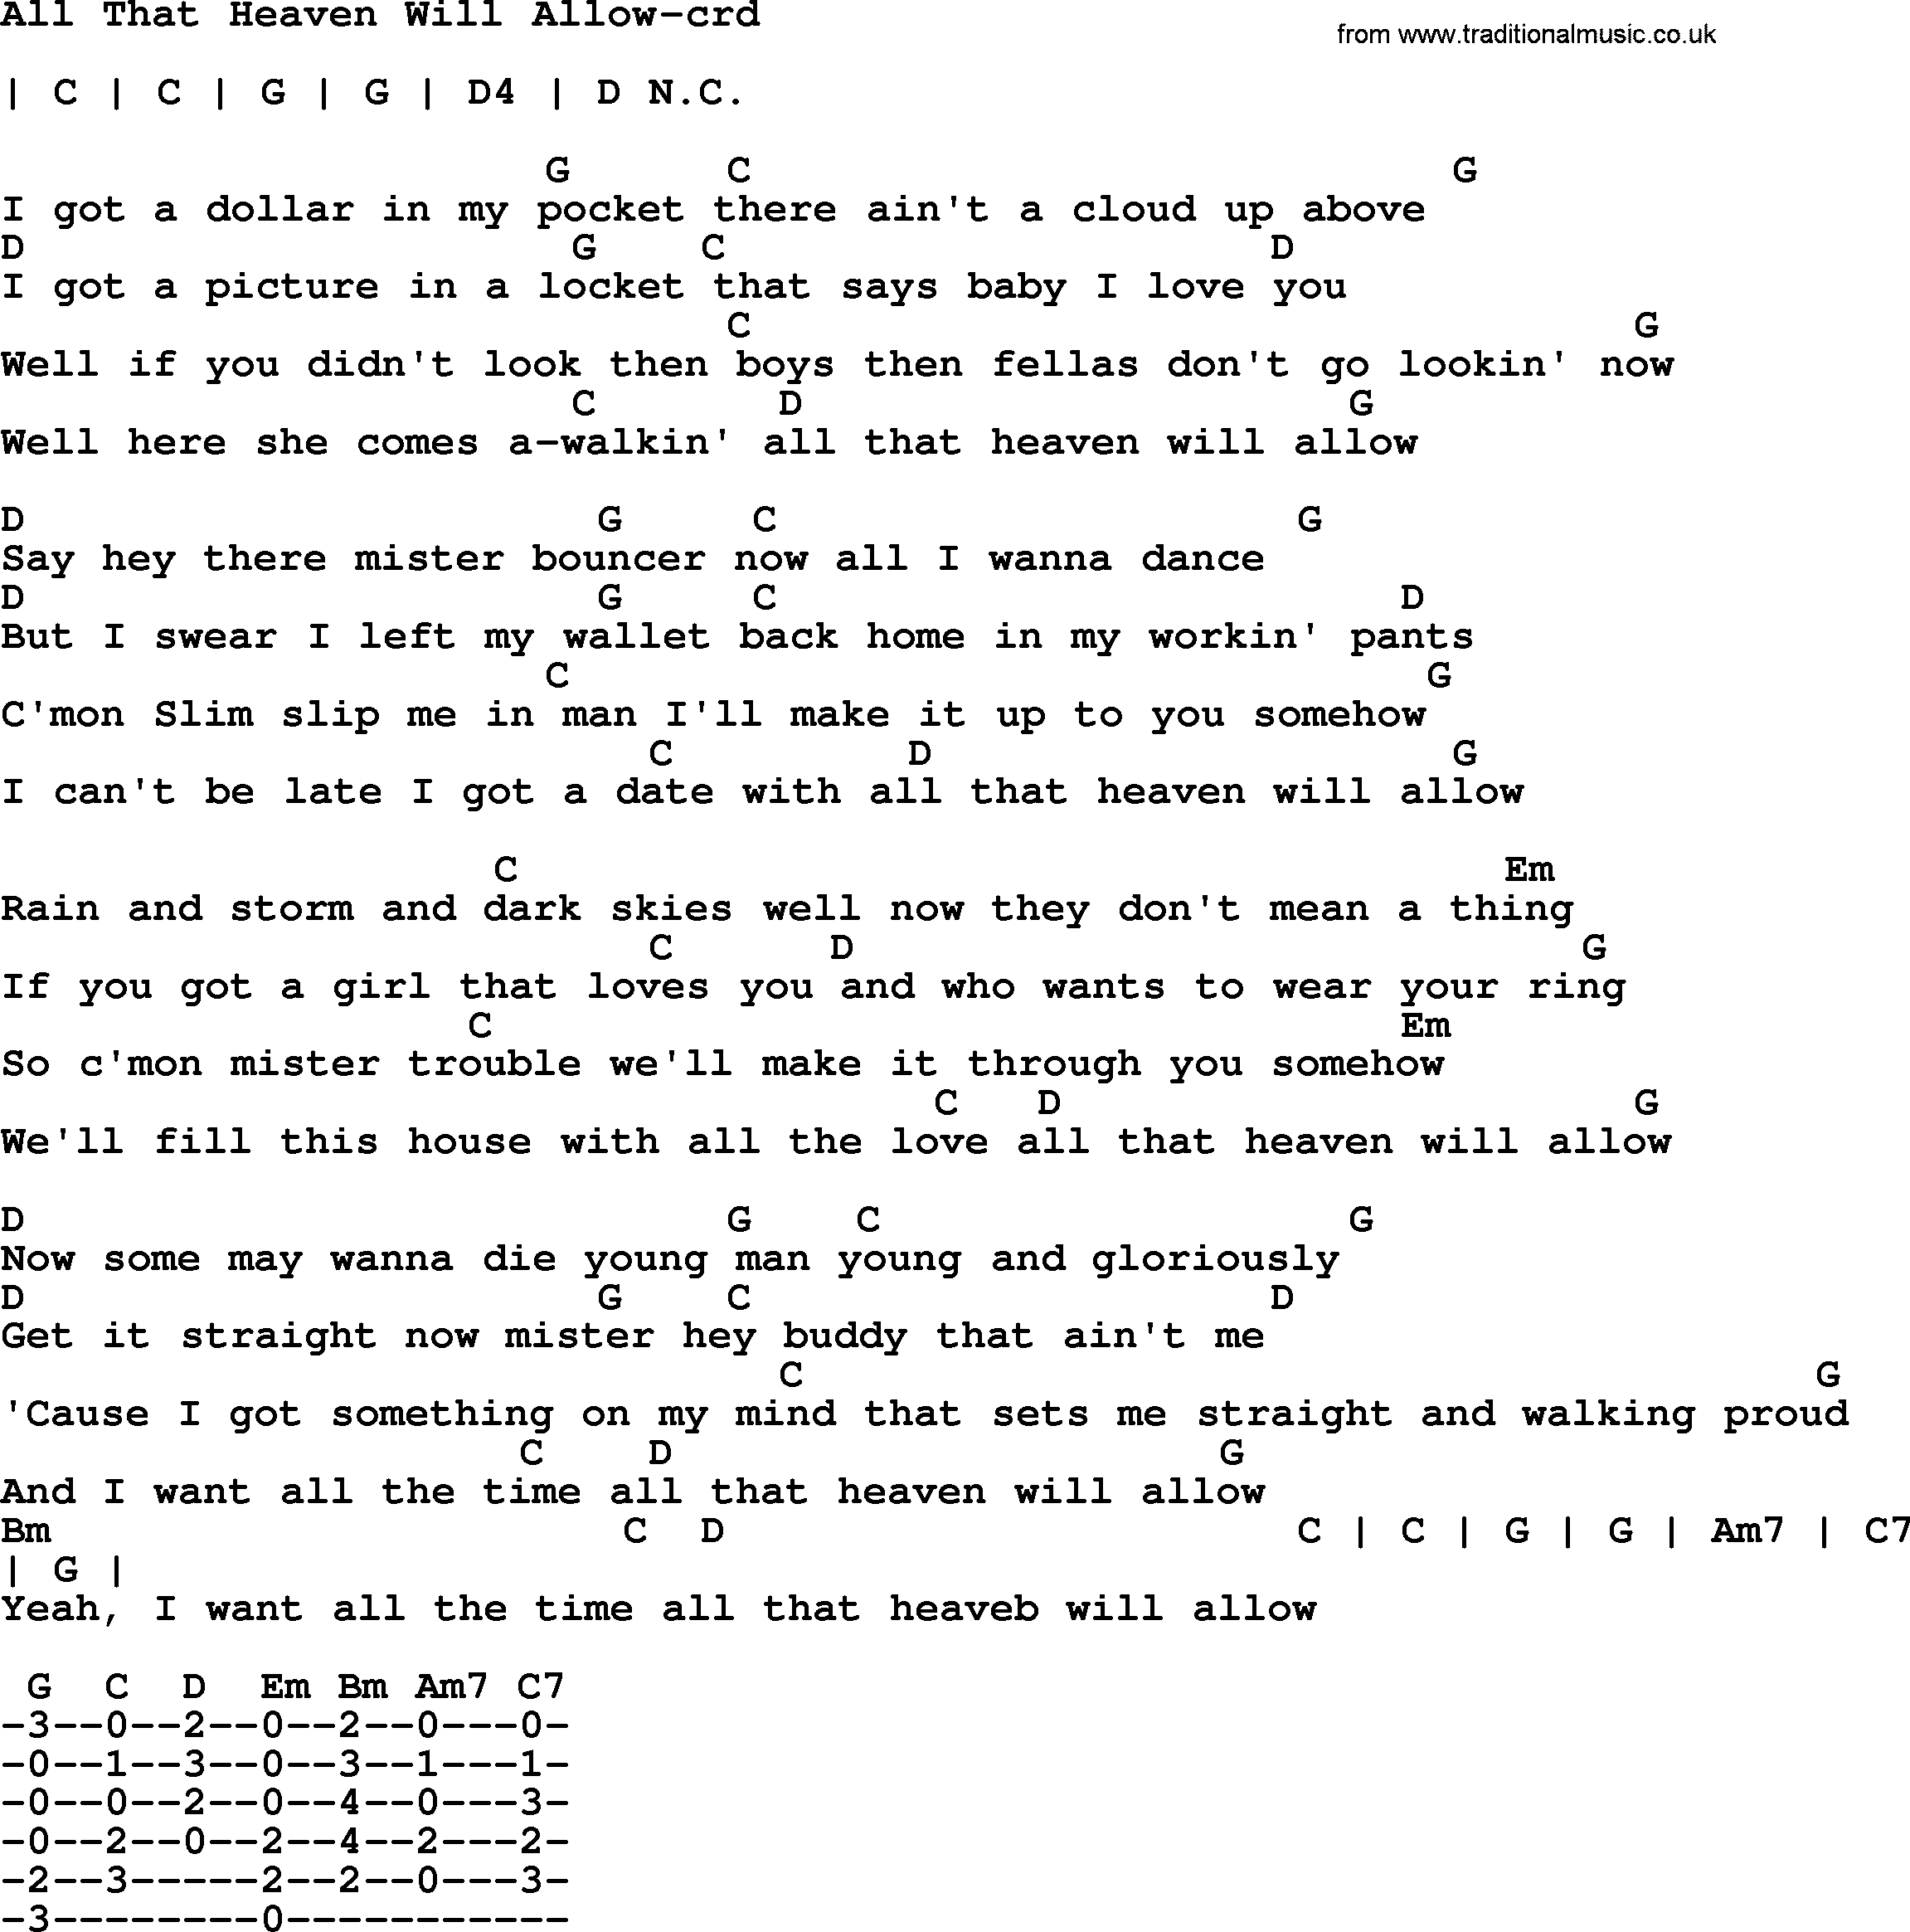 Bruce Springsteen song: All That Heaven Will Allow, lyrics and chords